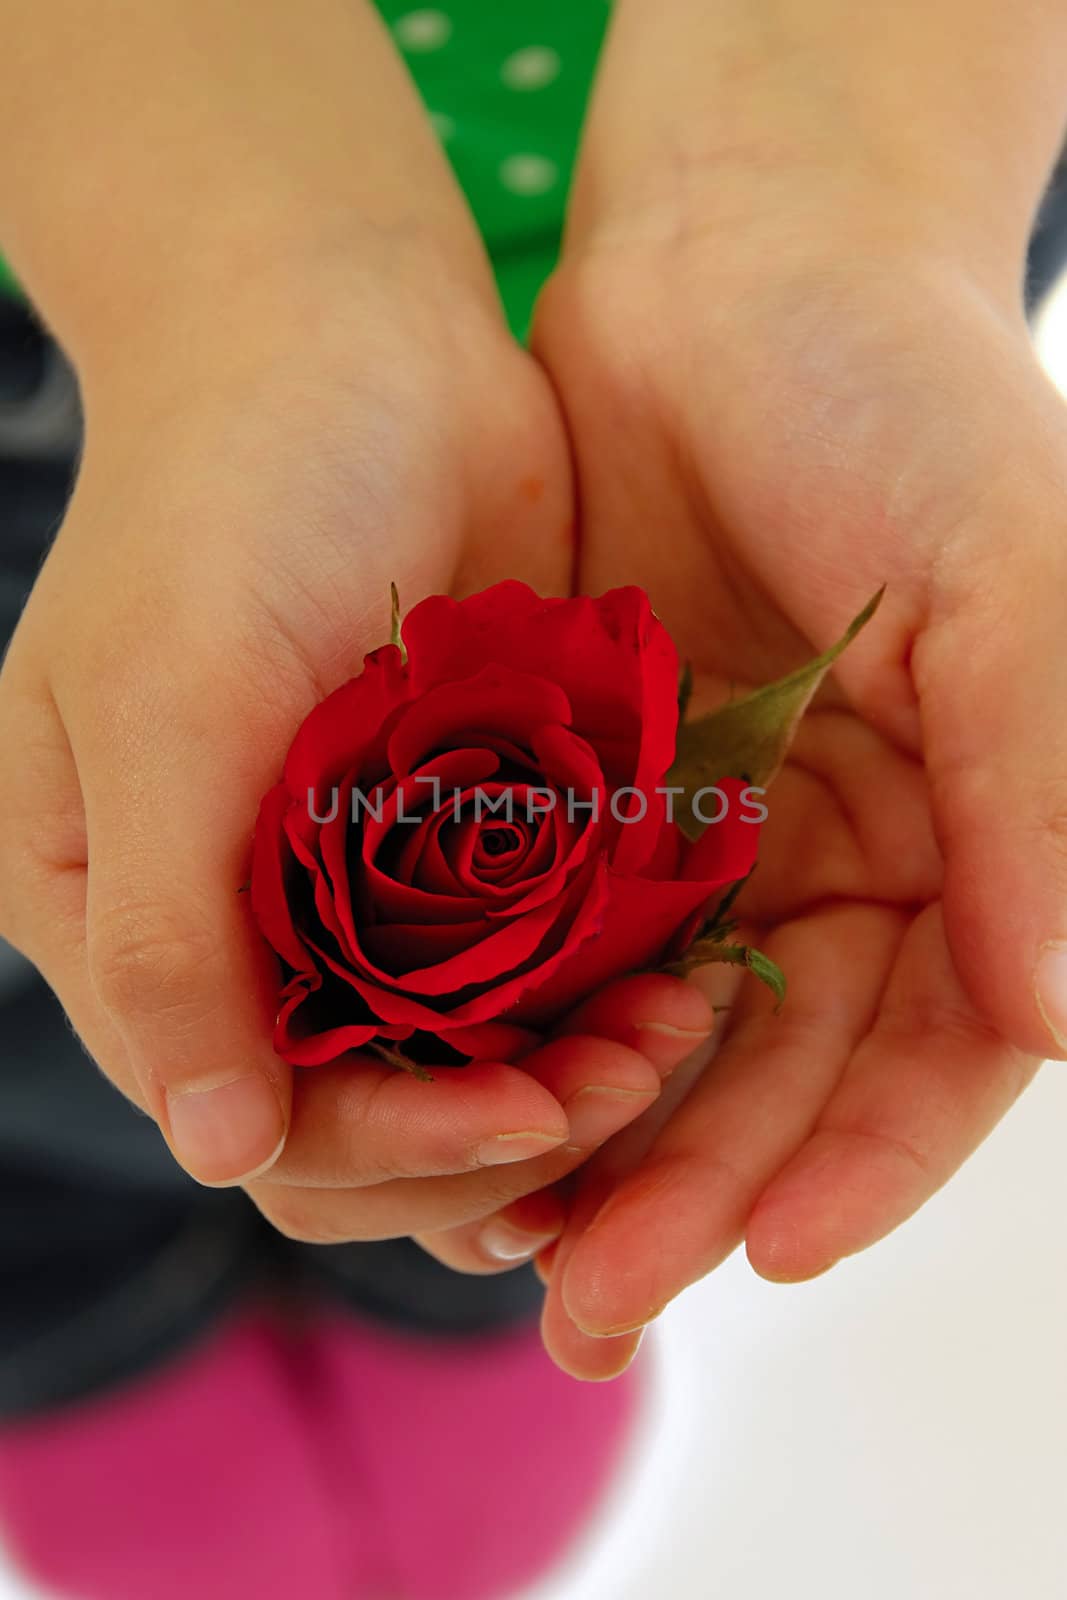 Child holding rose flower in hand on white background